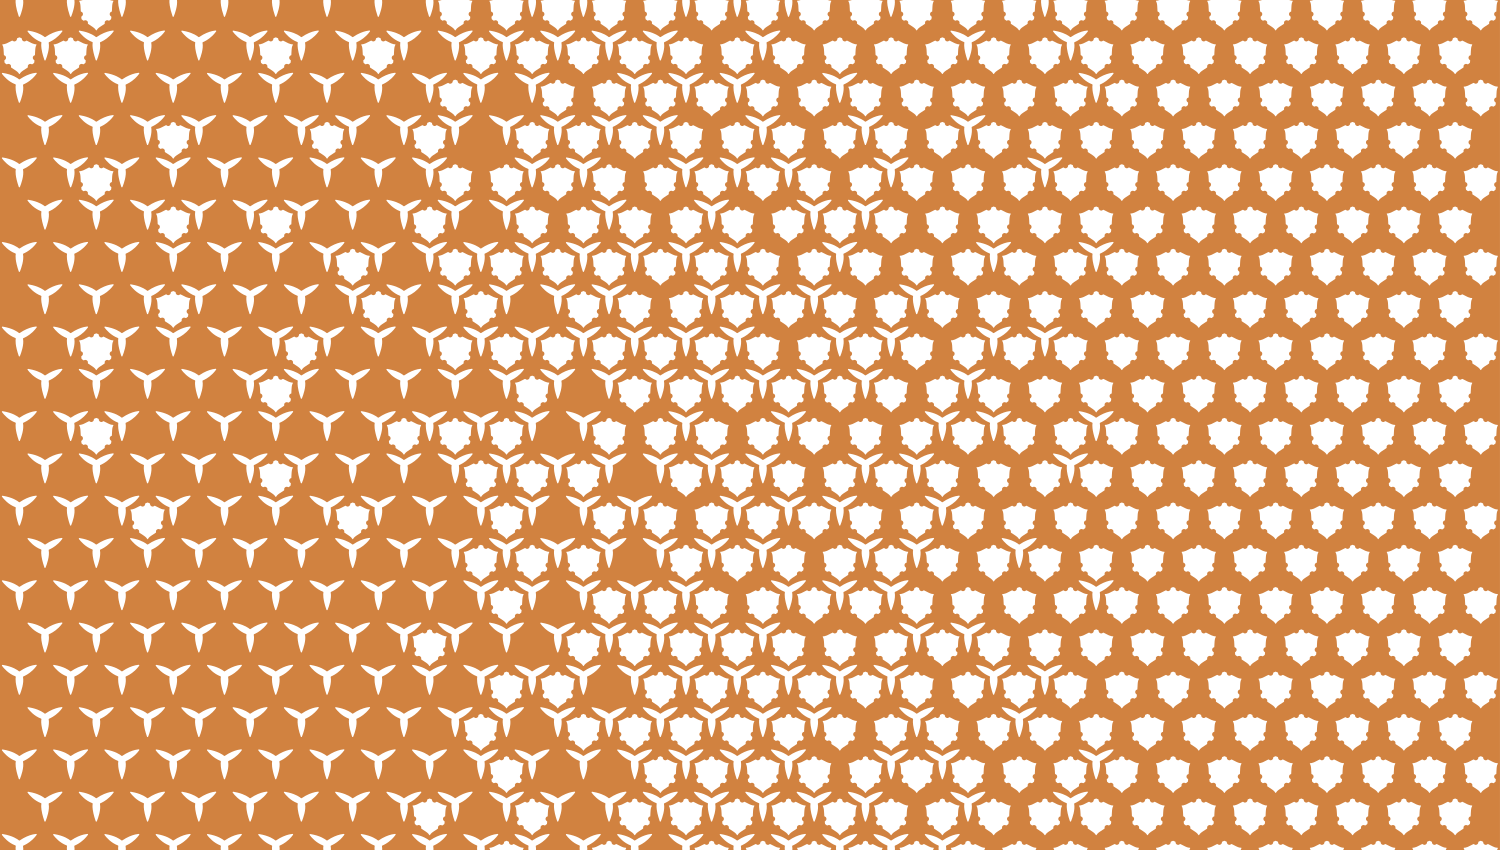 Parasoleil™ Apiary© pattern displayed with a ochre color overlay